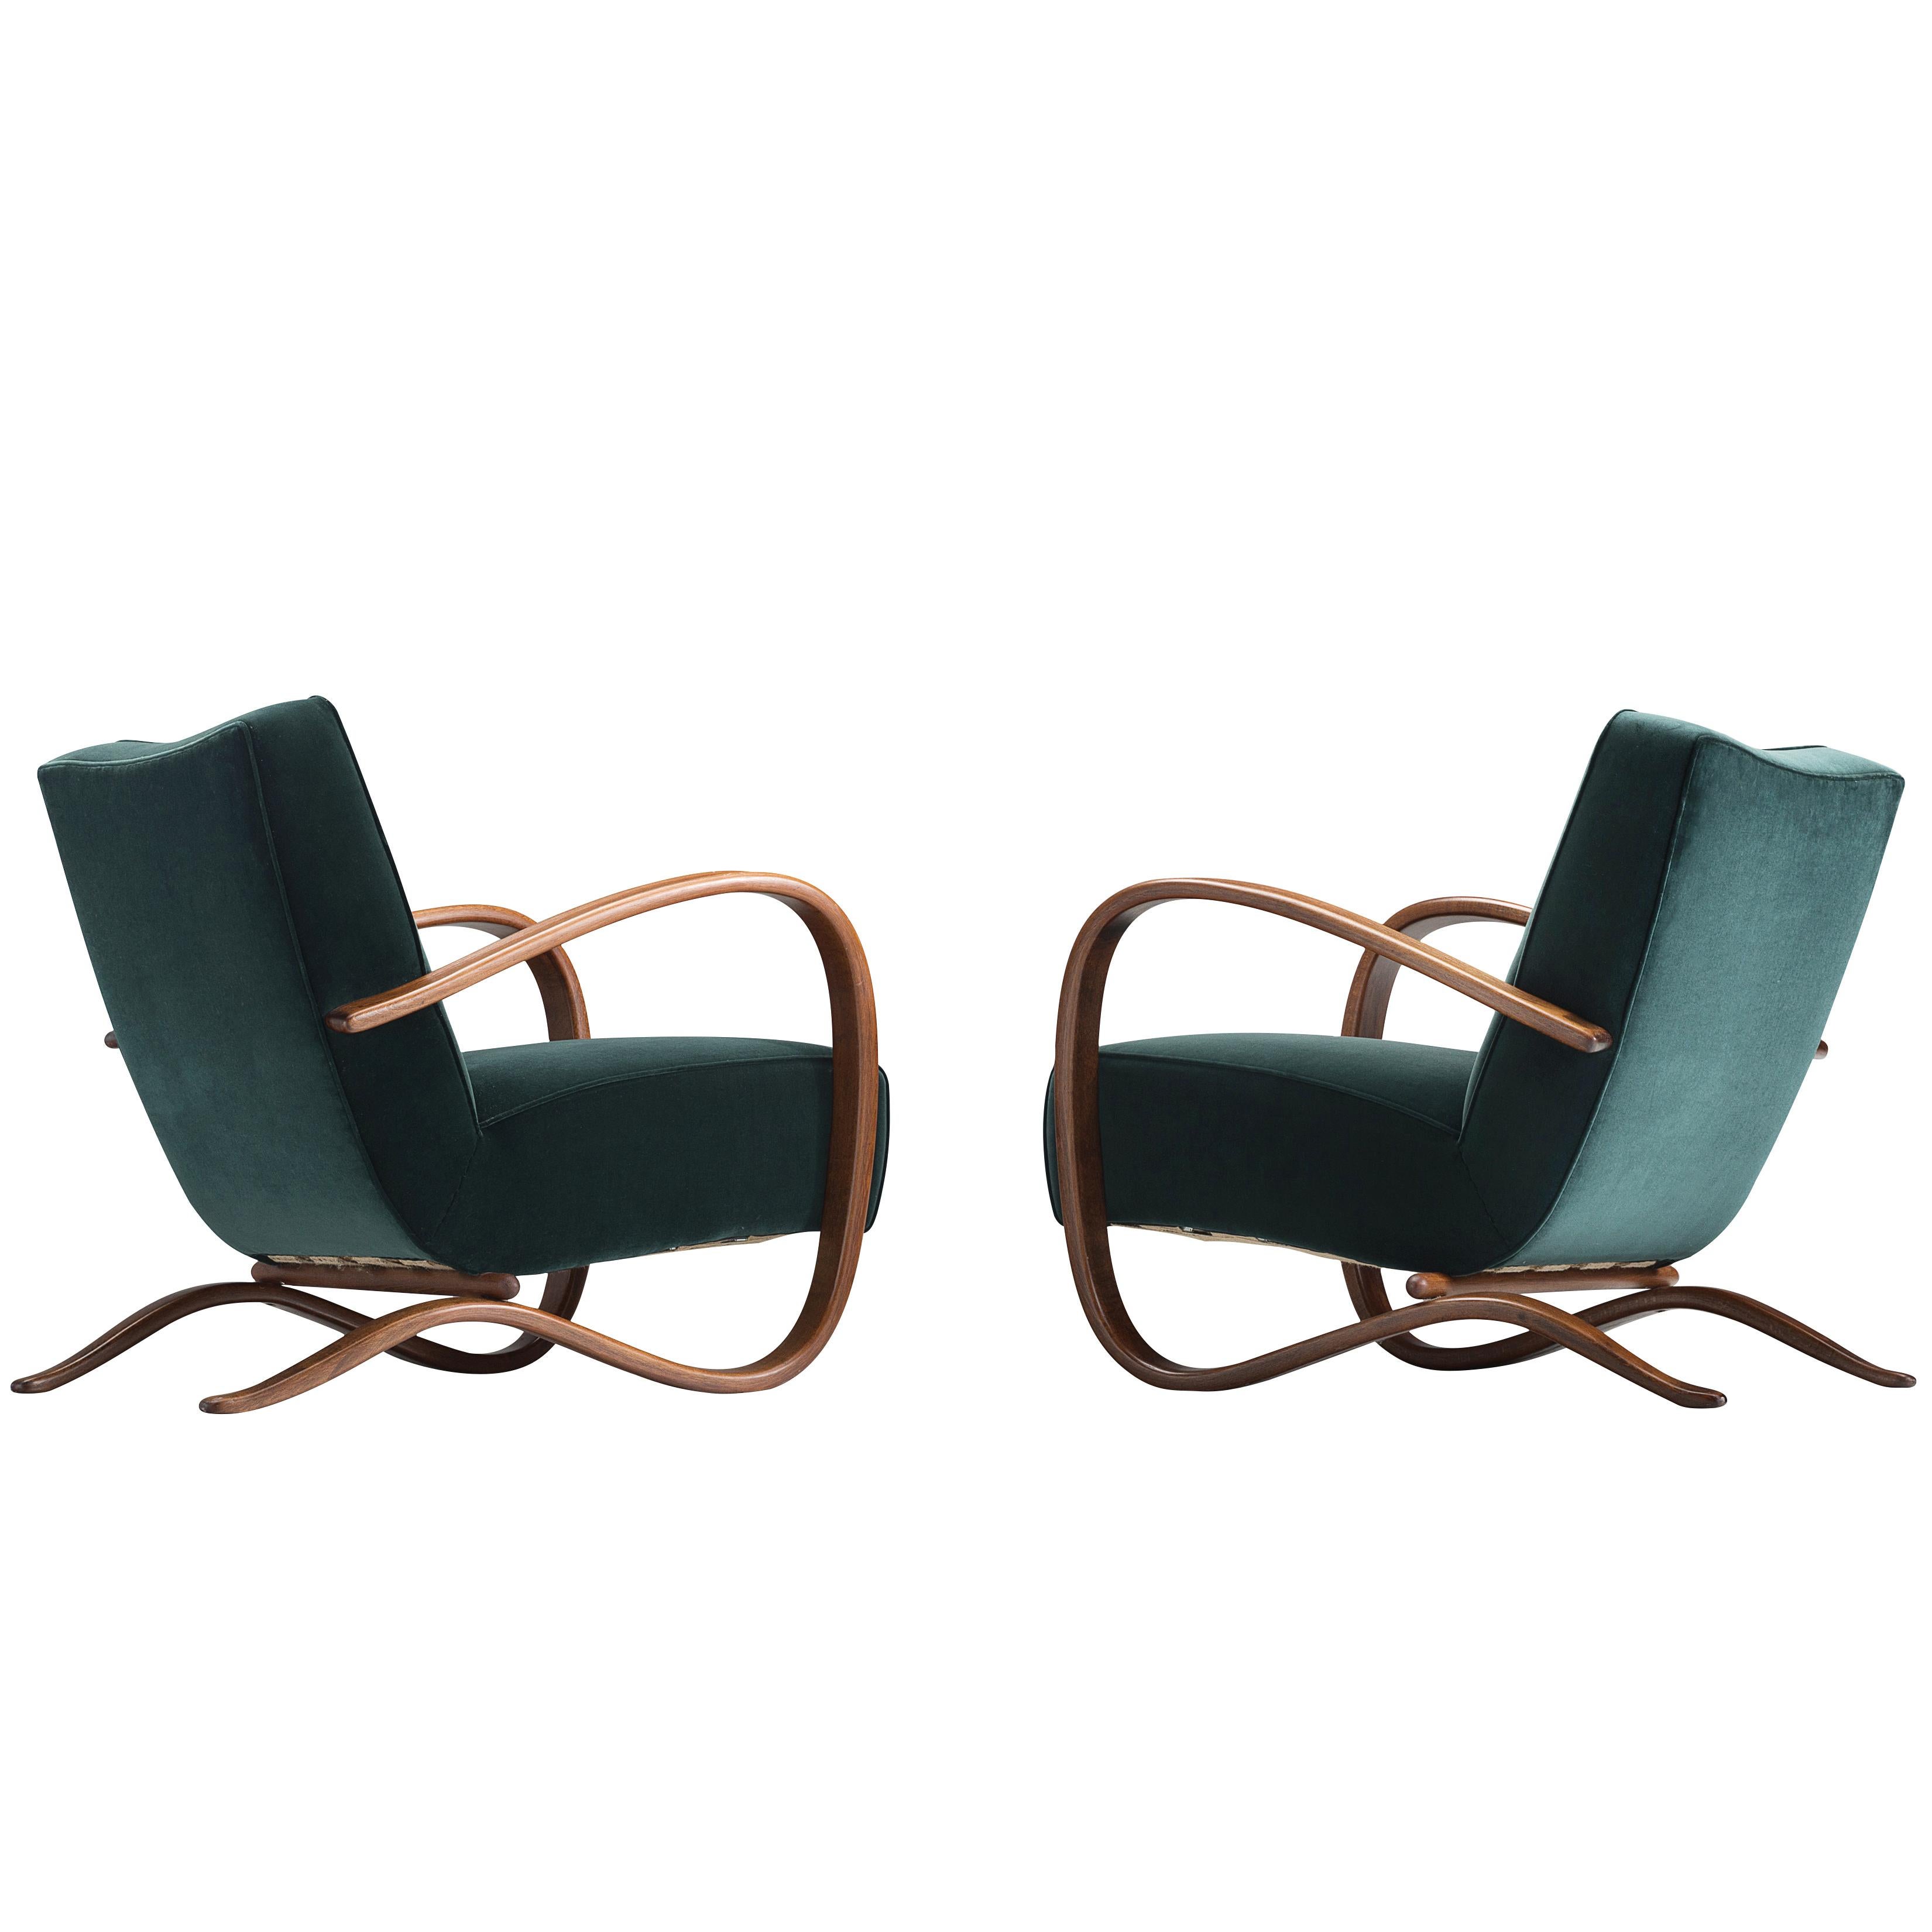 Jindrich Halabala, customizable lounge chair, wood, fabric, Czech Republic, 1930s 

Extraordinary easy chair in green velvet upholstery. This chair has a very dynamic and abundant appearance. Beautifully curved armrests in a brown color add a